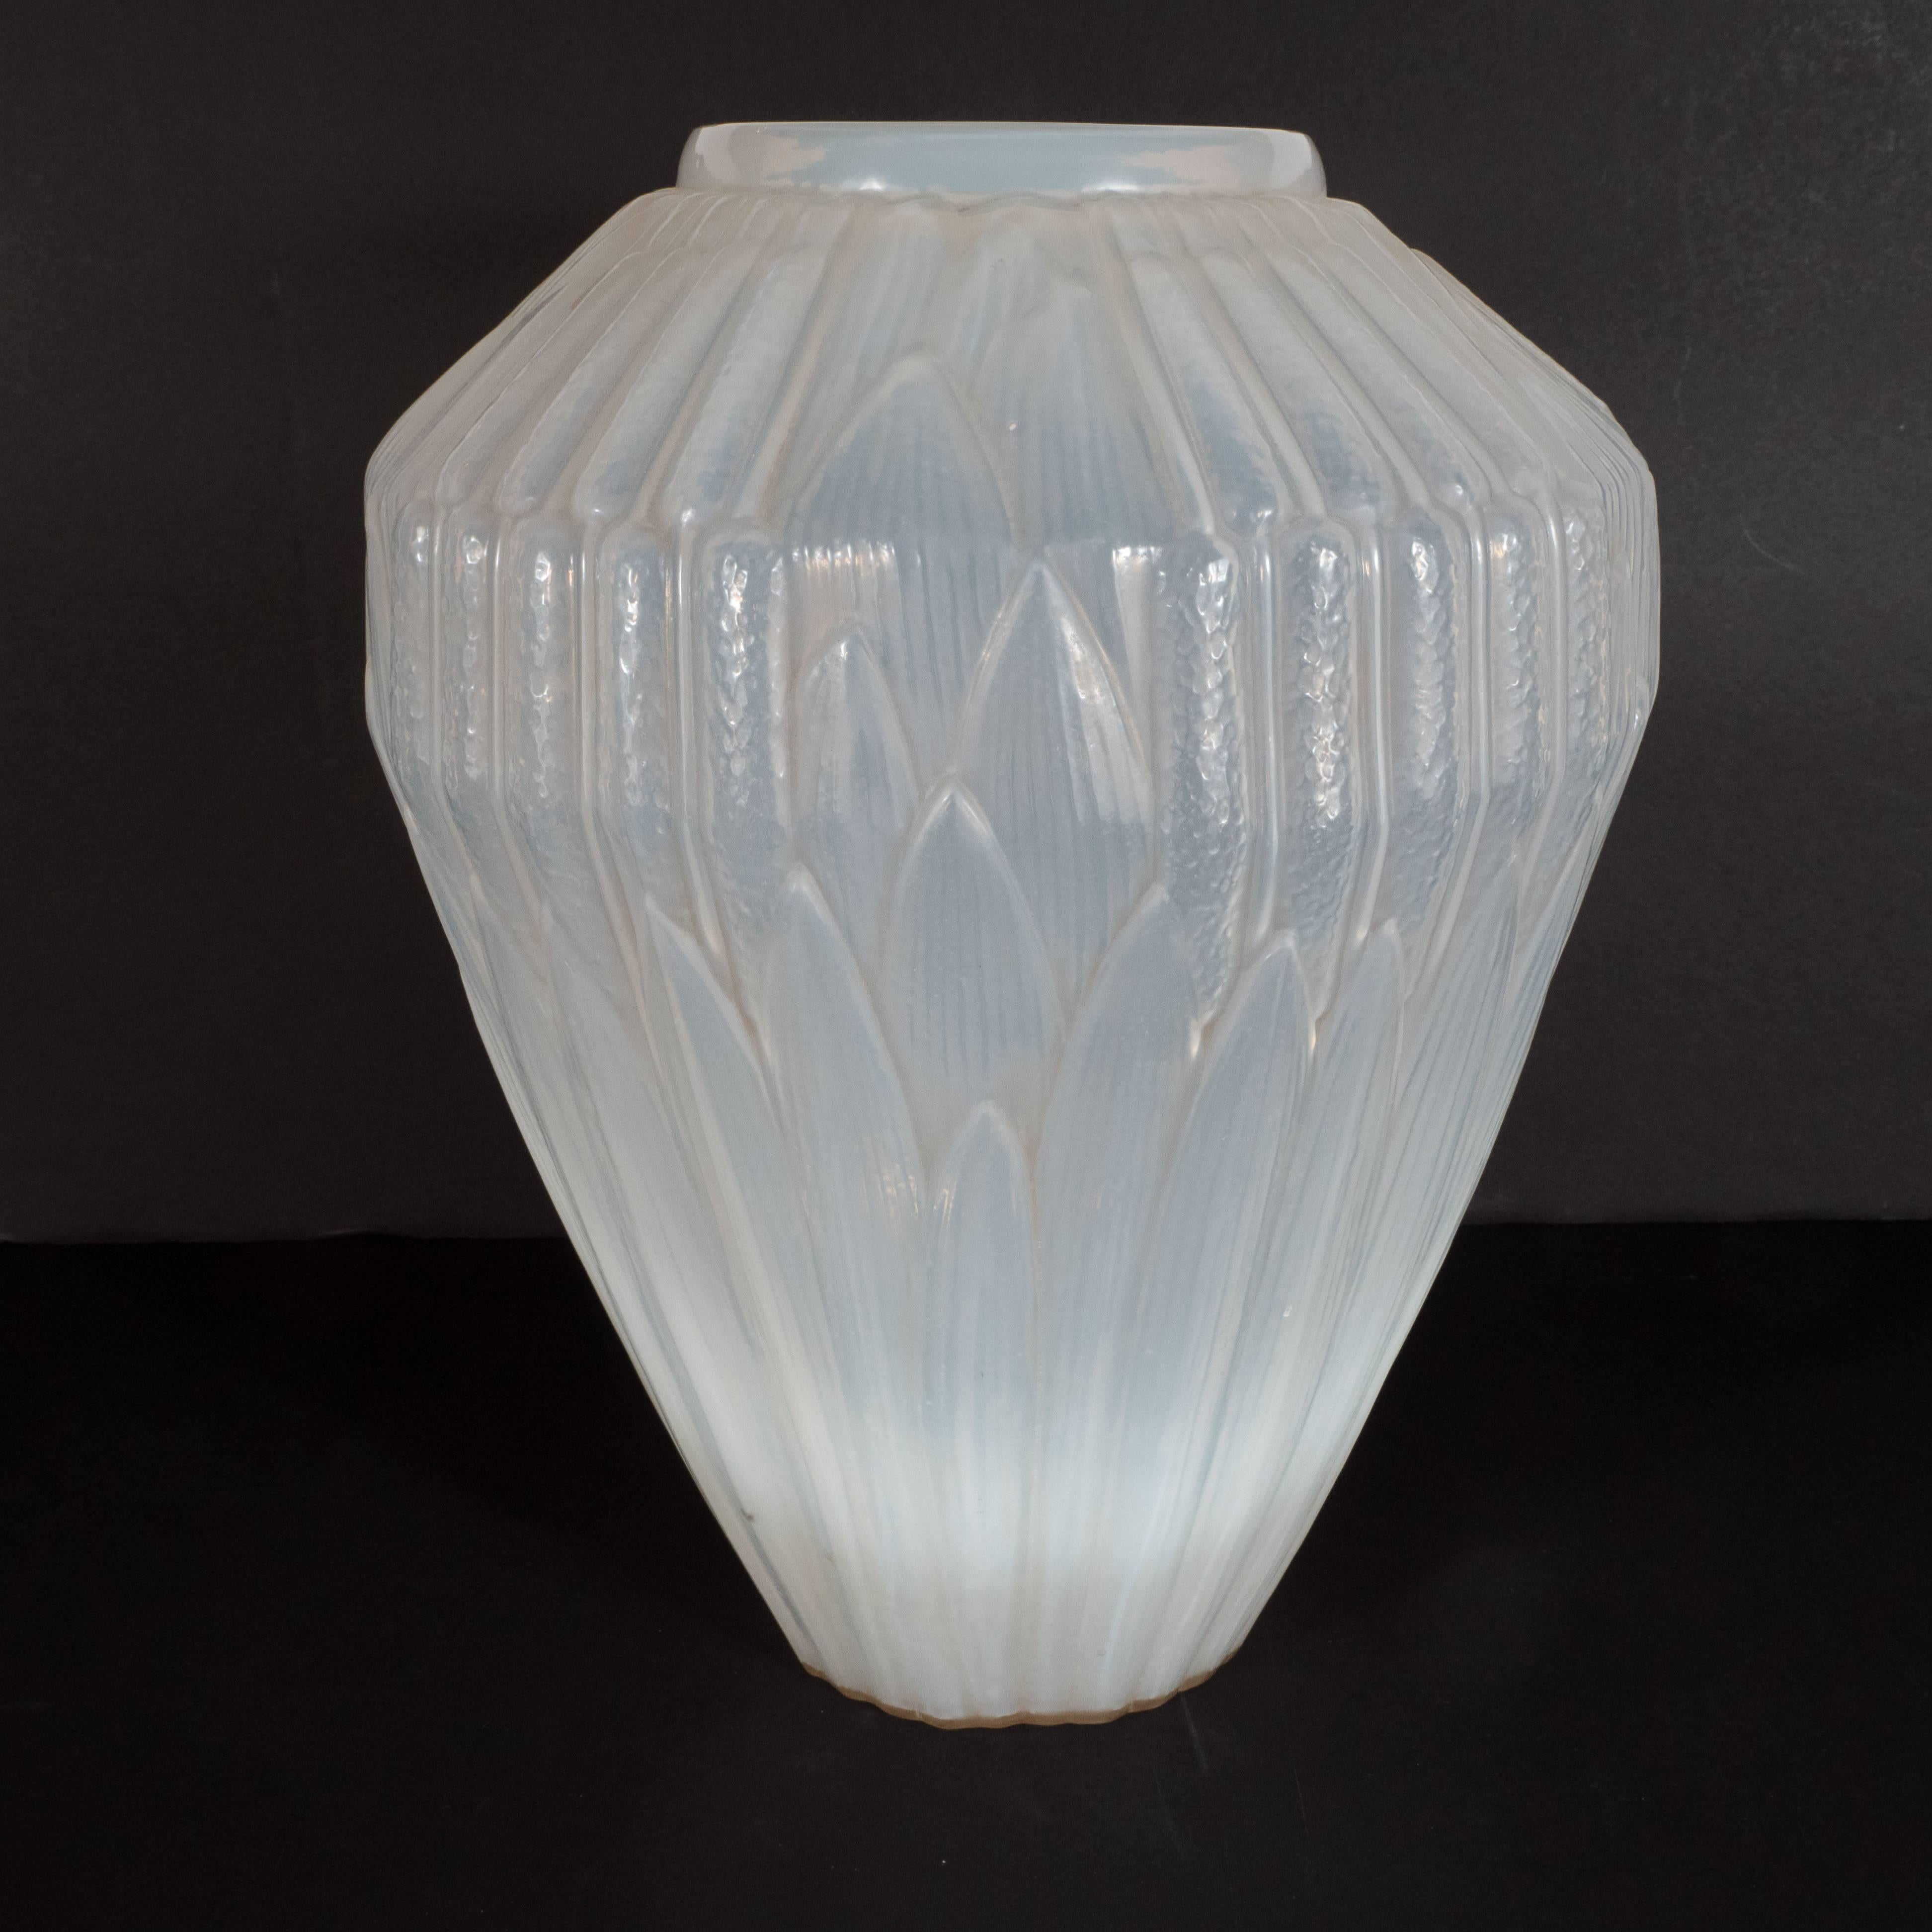 This impressive and dramatic vase was realized by the illustrious Parisian glass blowing atelier, Andre Hunabelle, circa 1930. Realized in opalescent glass with a subtle iridescence and opacity, this piece offers a wealth of geometric patterns in